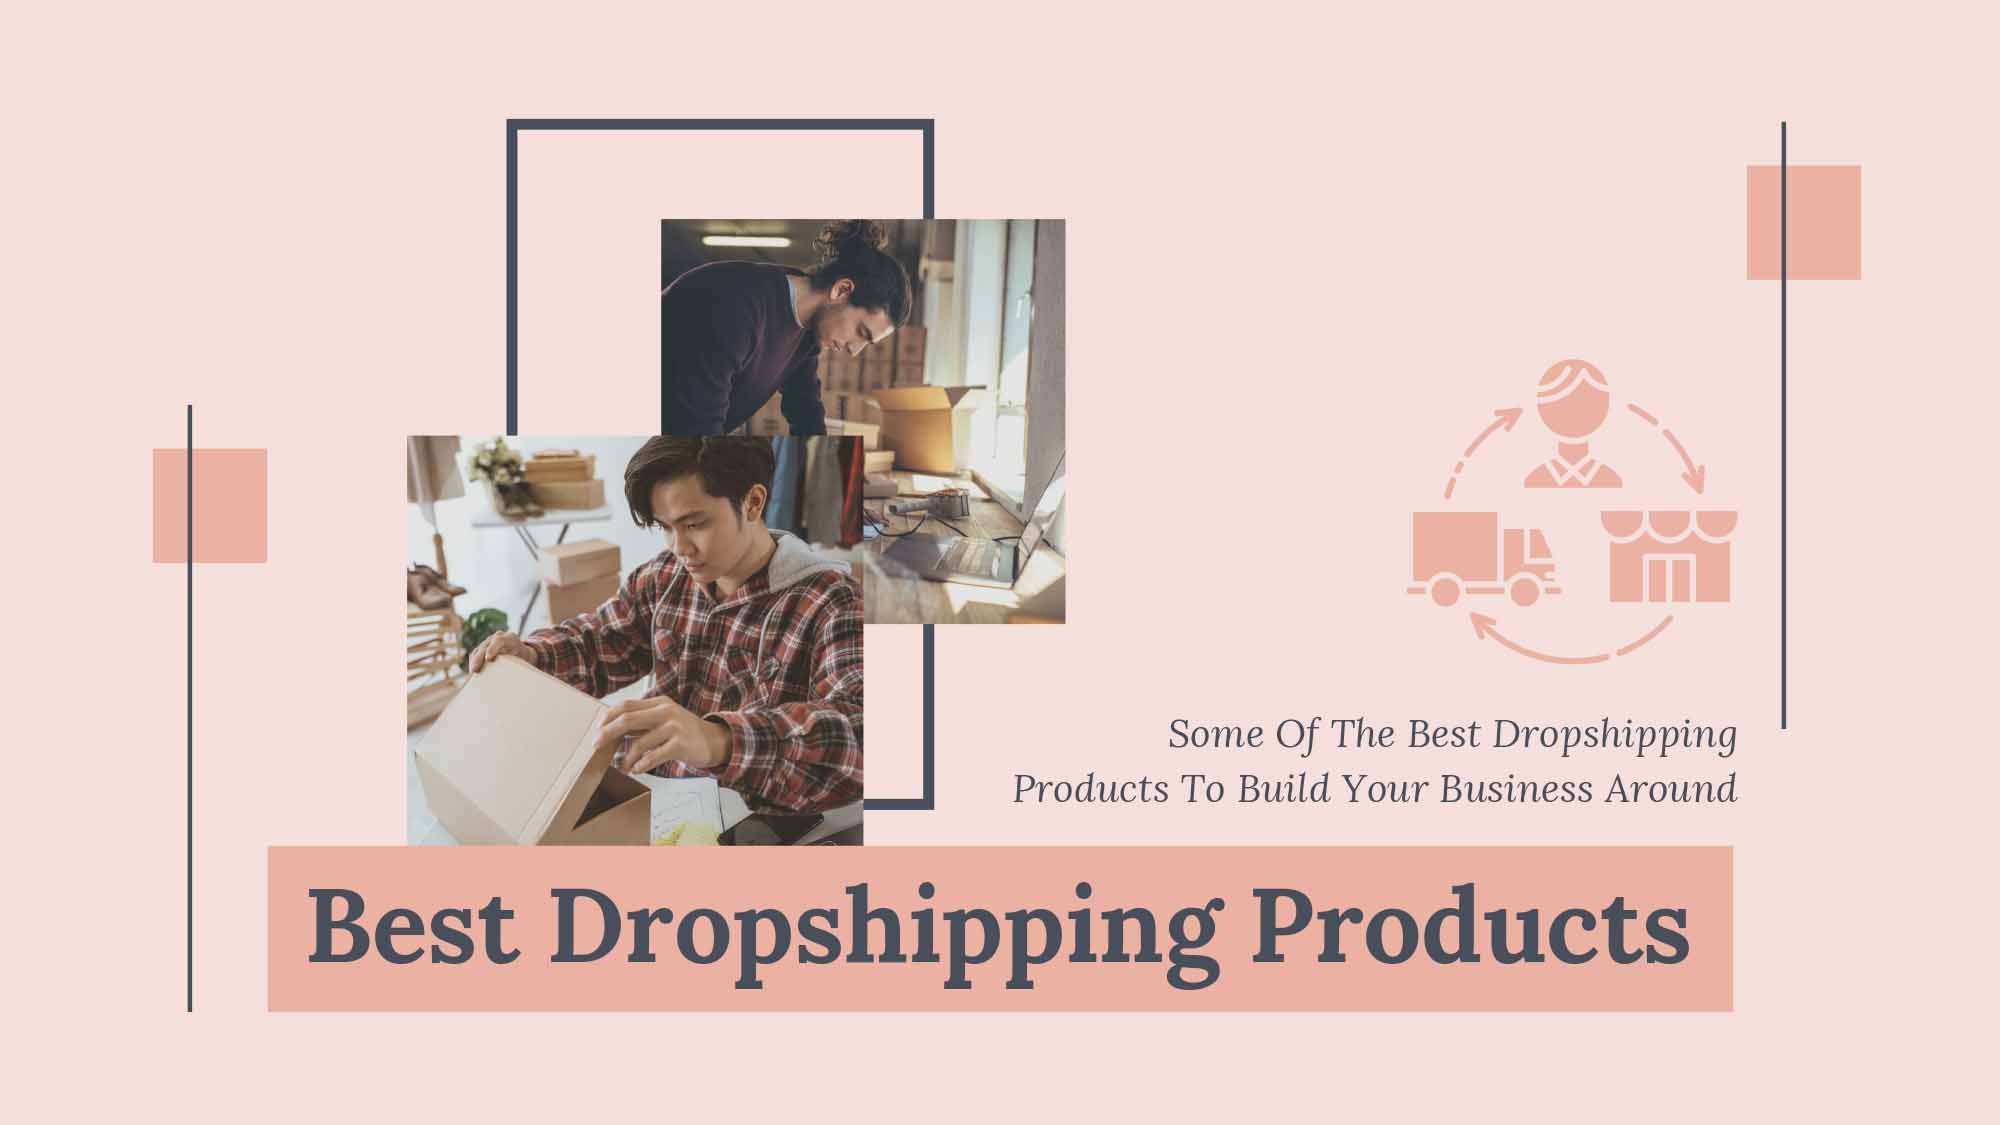 Some Of The Best Dropshipping Products To Build Your Business Around